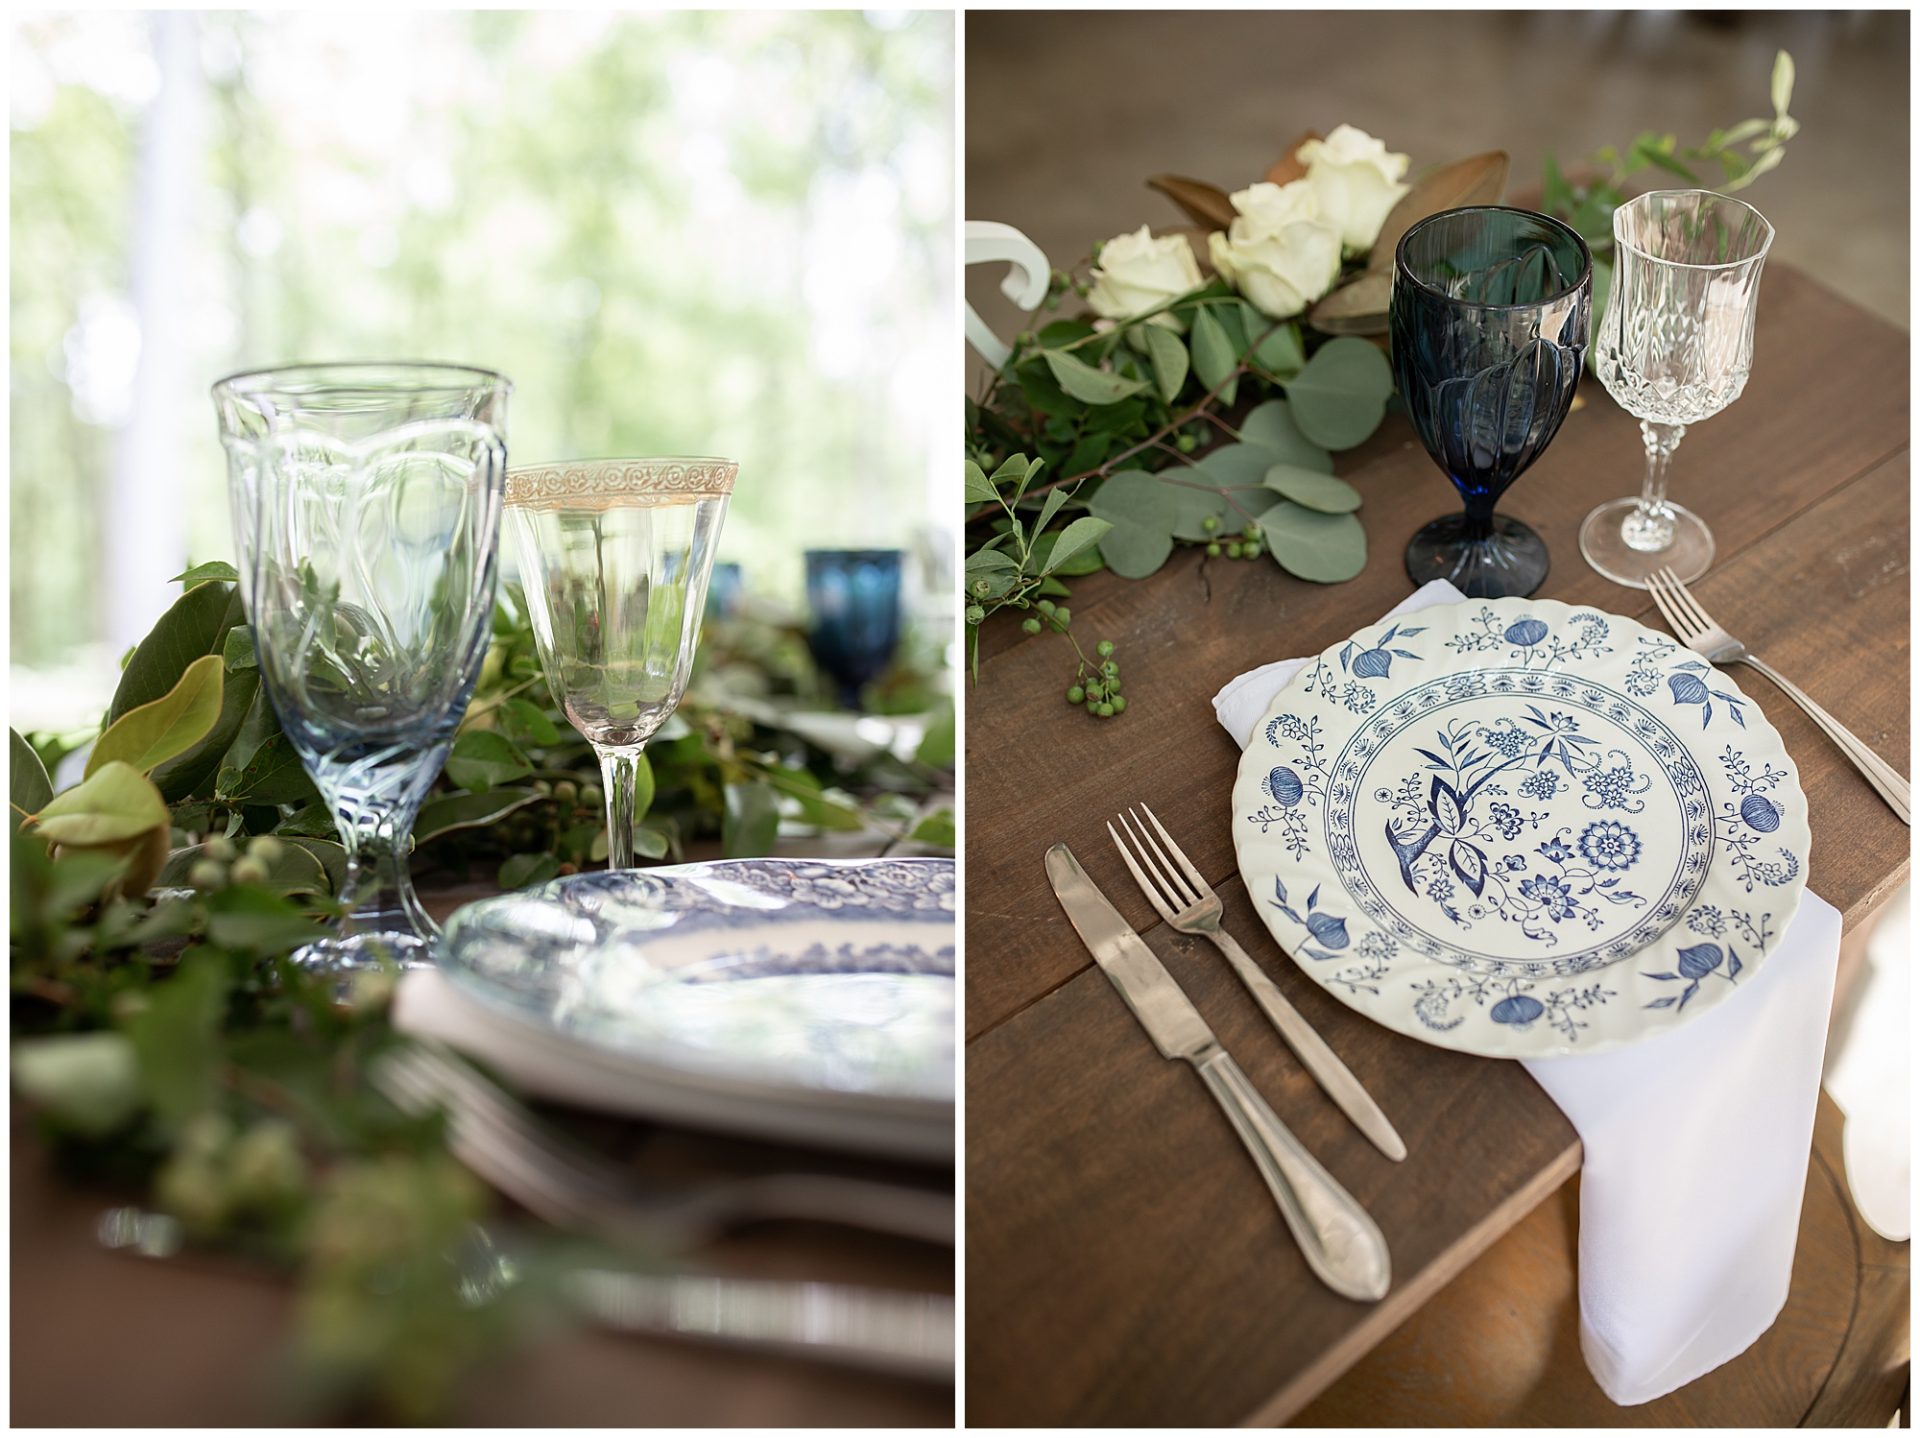 Chapel in the woods, firefly lane wedding, nashville wedding, open air chapel, rustic chapel, antique wedding place settings